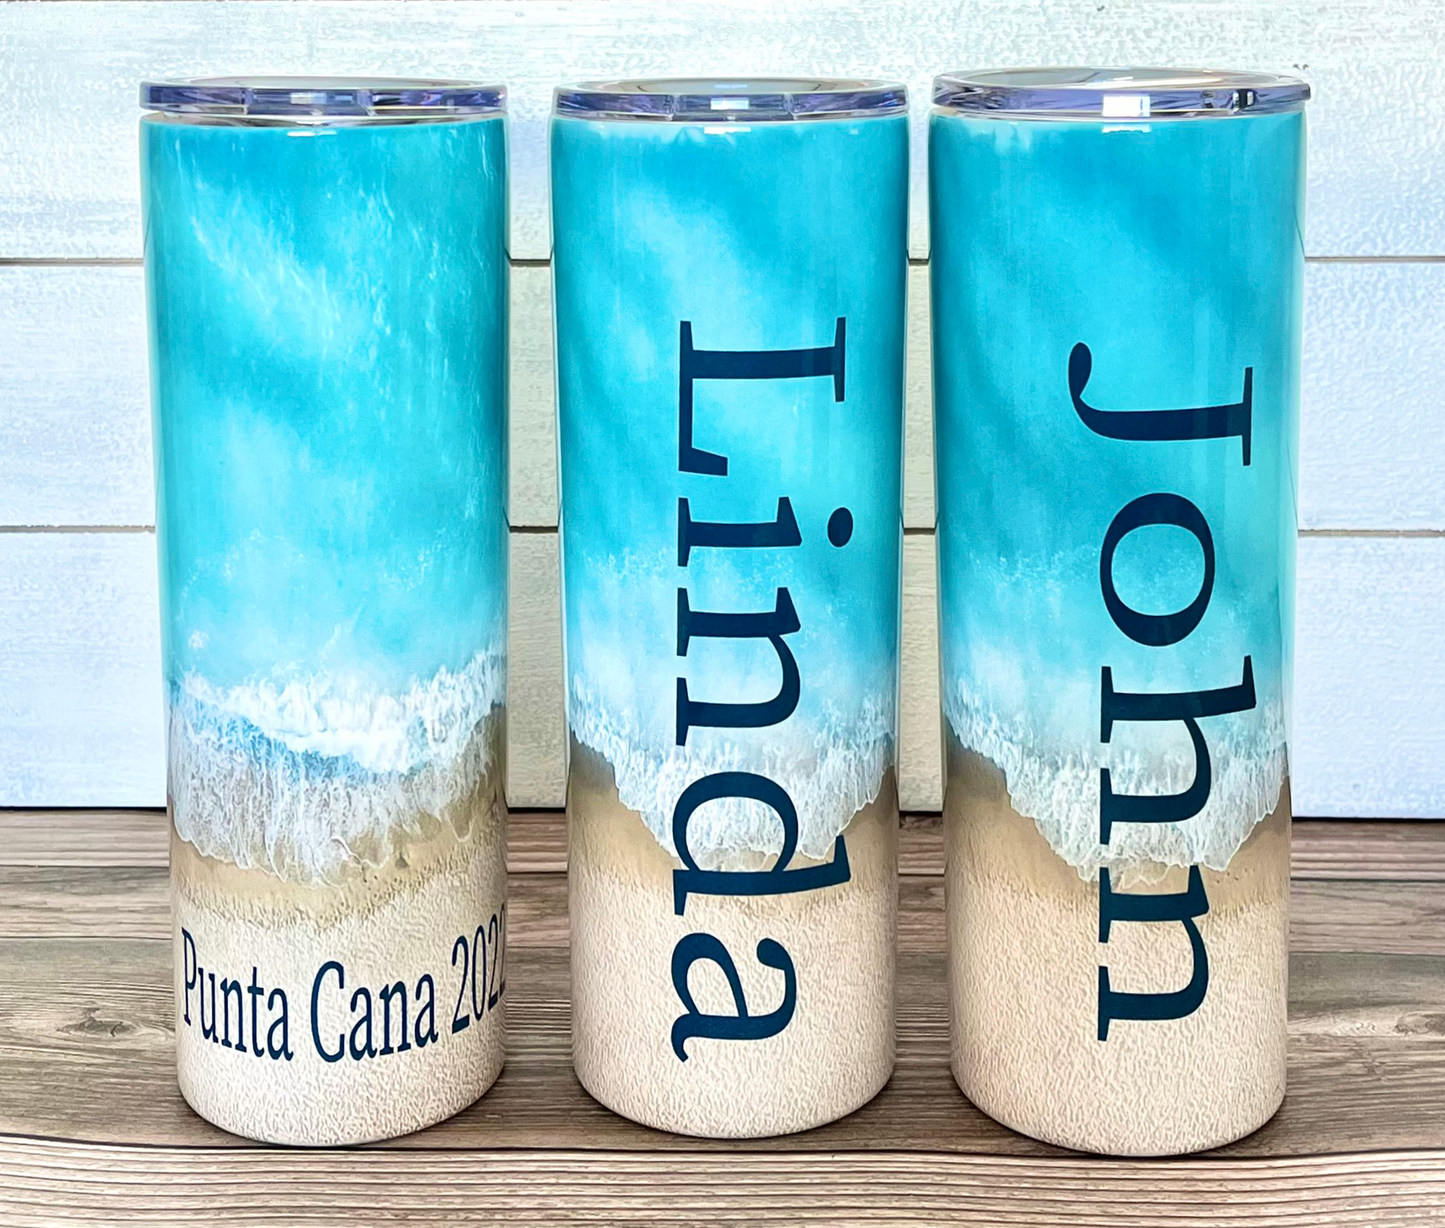 20 oz Personalized Beach Vacation Tumbler